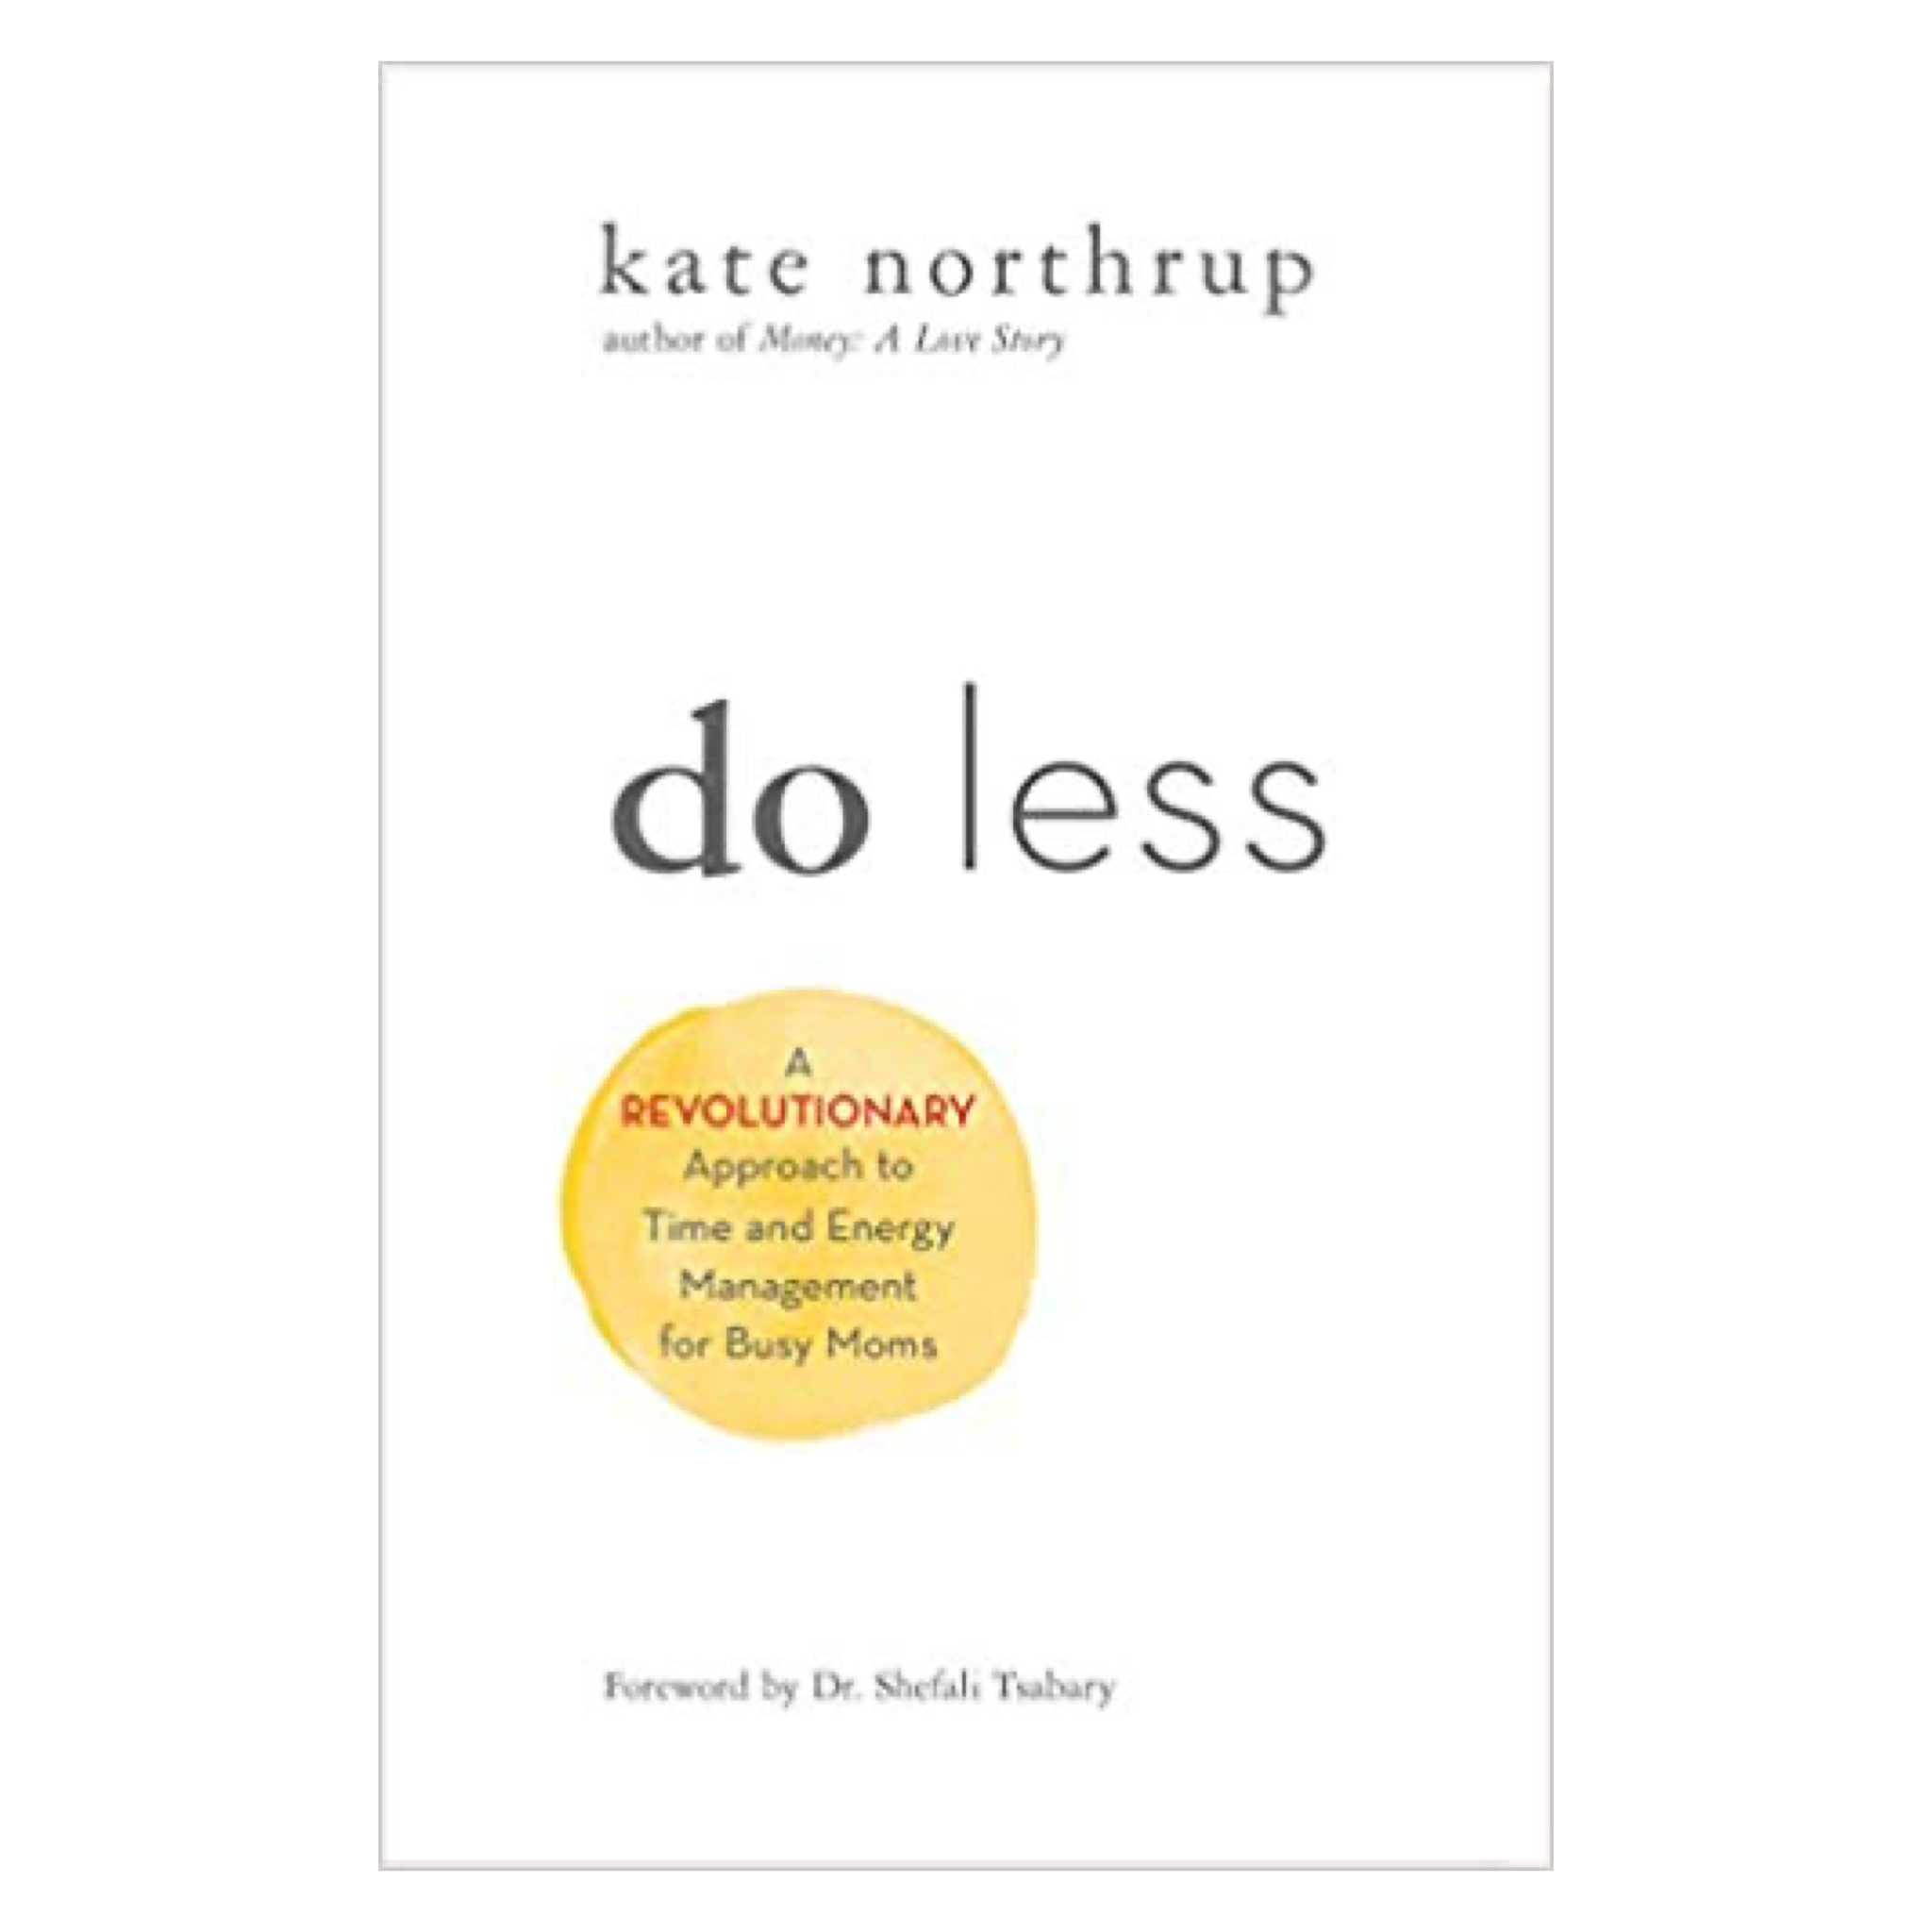 Do Less by Kate Northurp